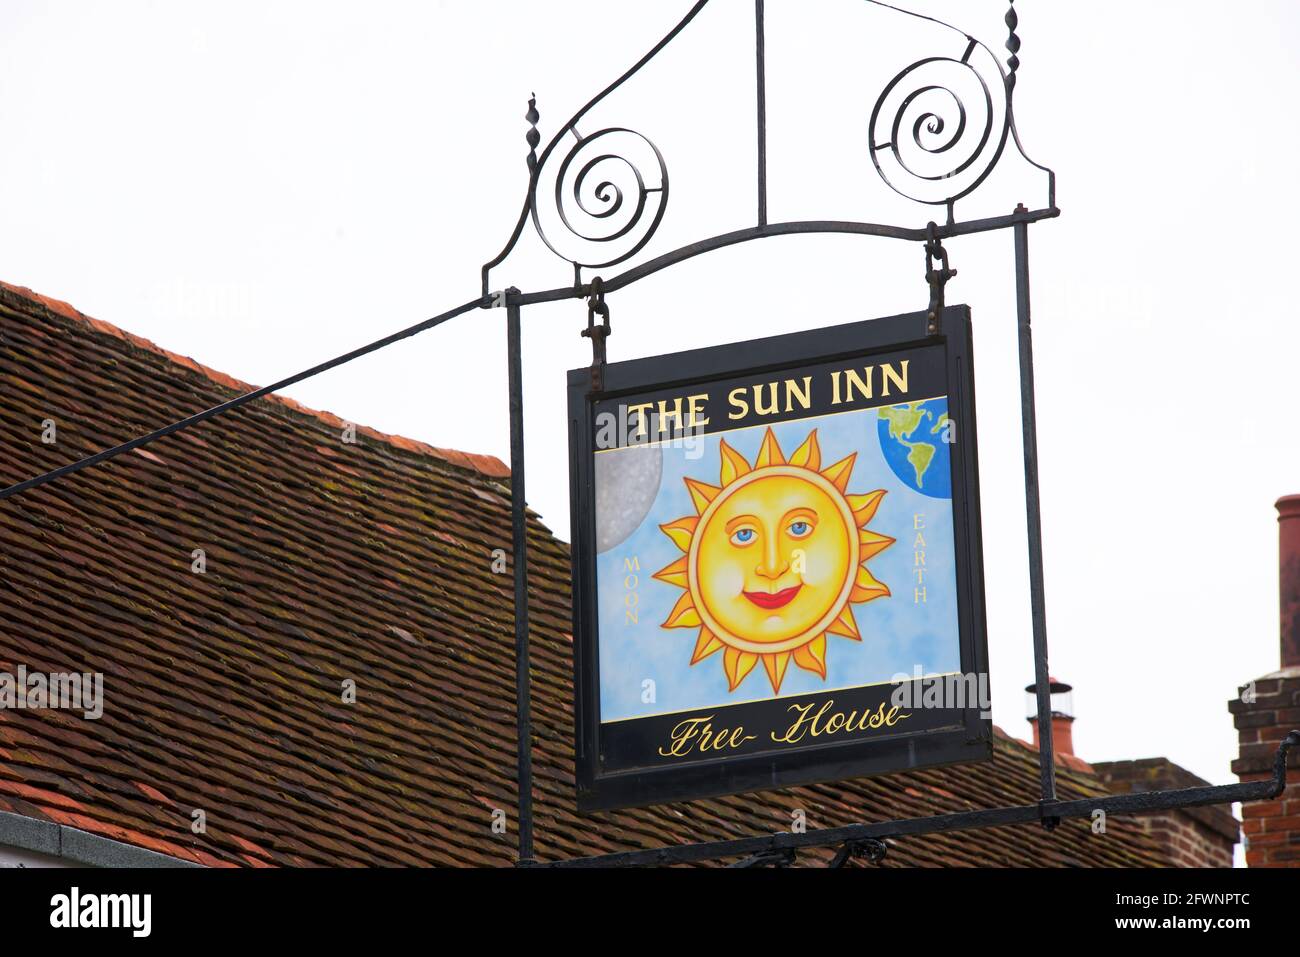 Pub sign for the Sun Inn, in the village of Dedham, Essex, England UK Stock Photo